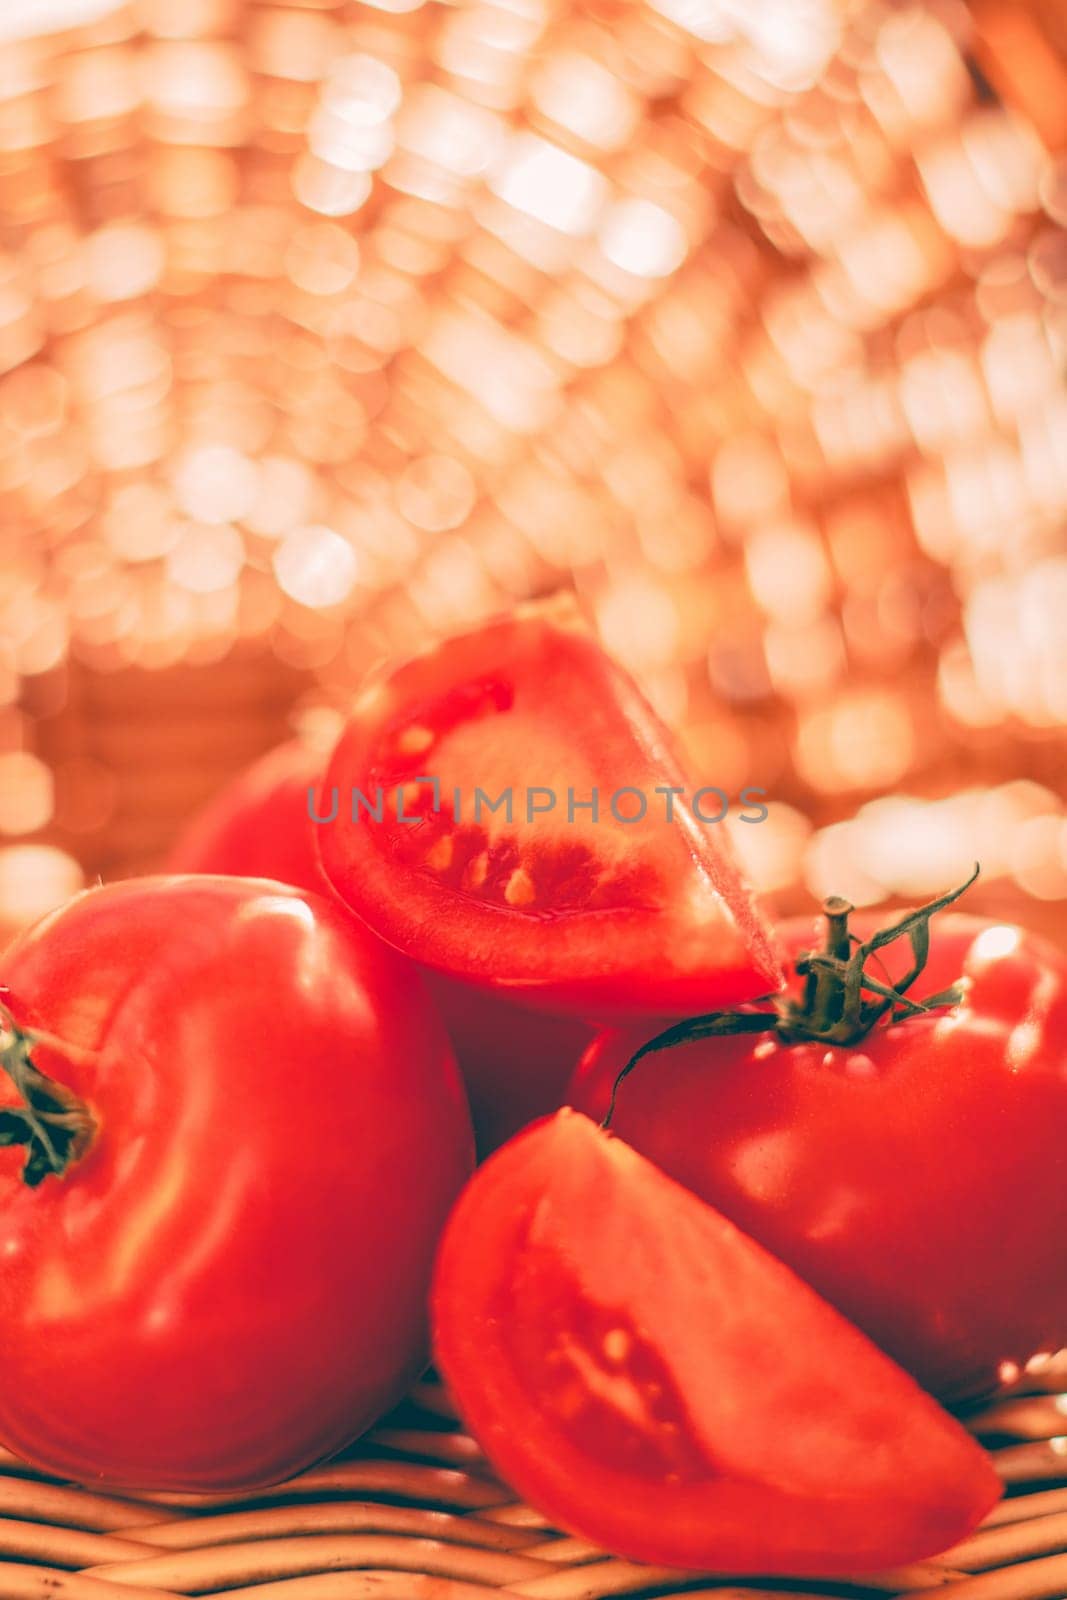 ripe tomatoes - organic vegetables and healthy eating styled concept, elegant visuals